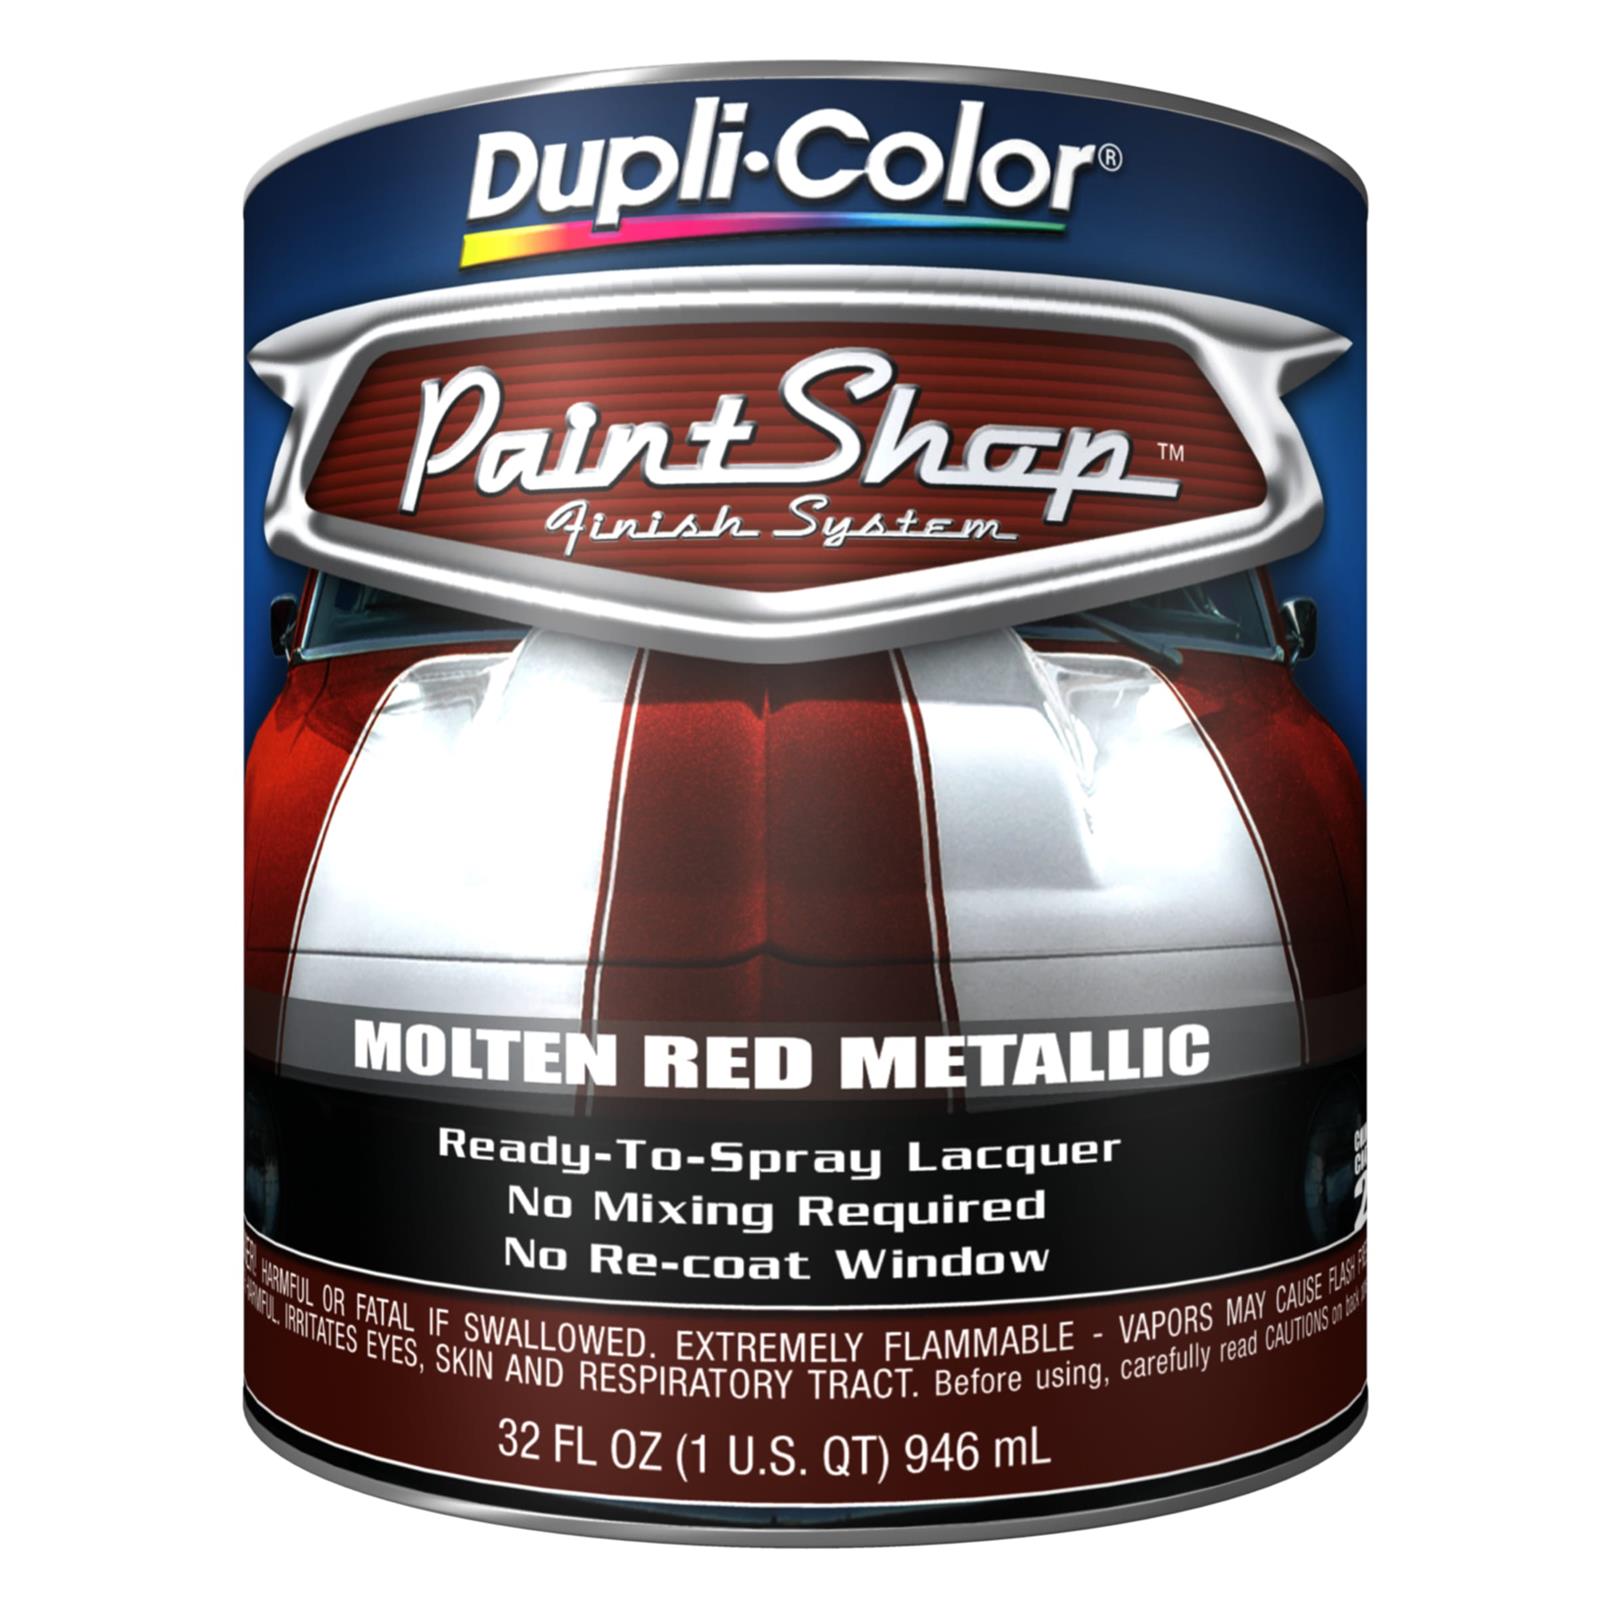 DupliColor BSP212 DupliColor Paint Shop Finish Systems Summit Racing